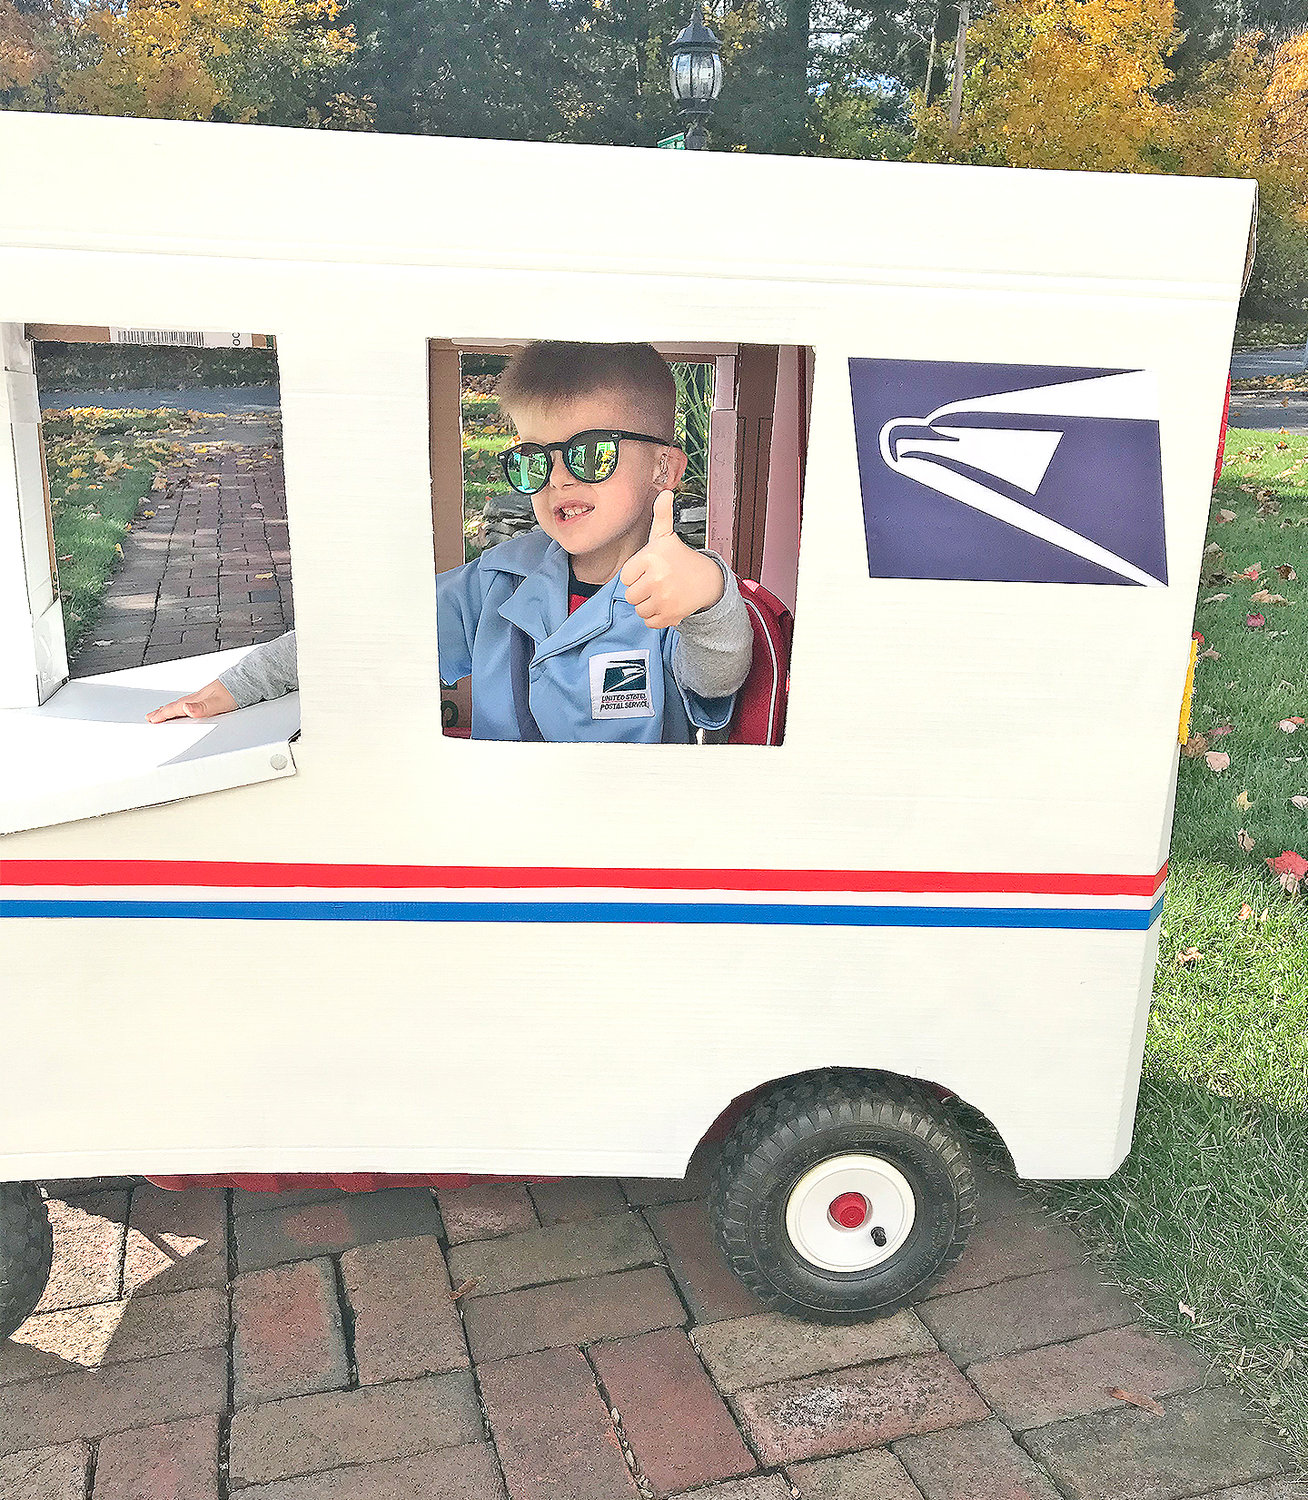 COOL RIDE — Peter Corigliano IV gives a thumbs up of approval inside his homemade U.S. Postal Service mail truck, designed and constructed by his grandmother, Carlene Corigliano.